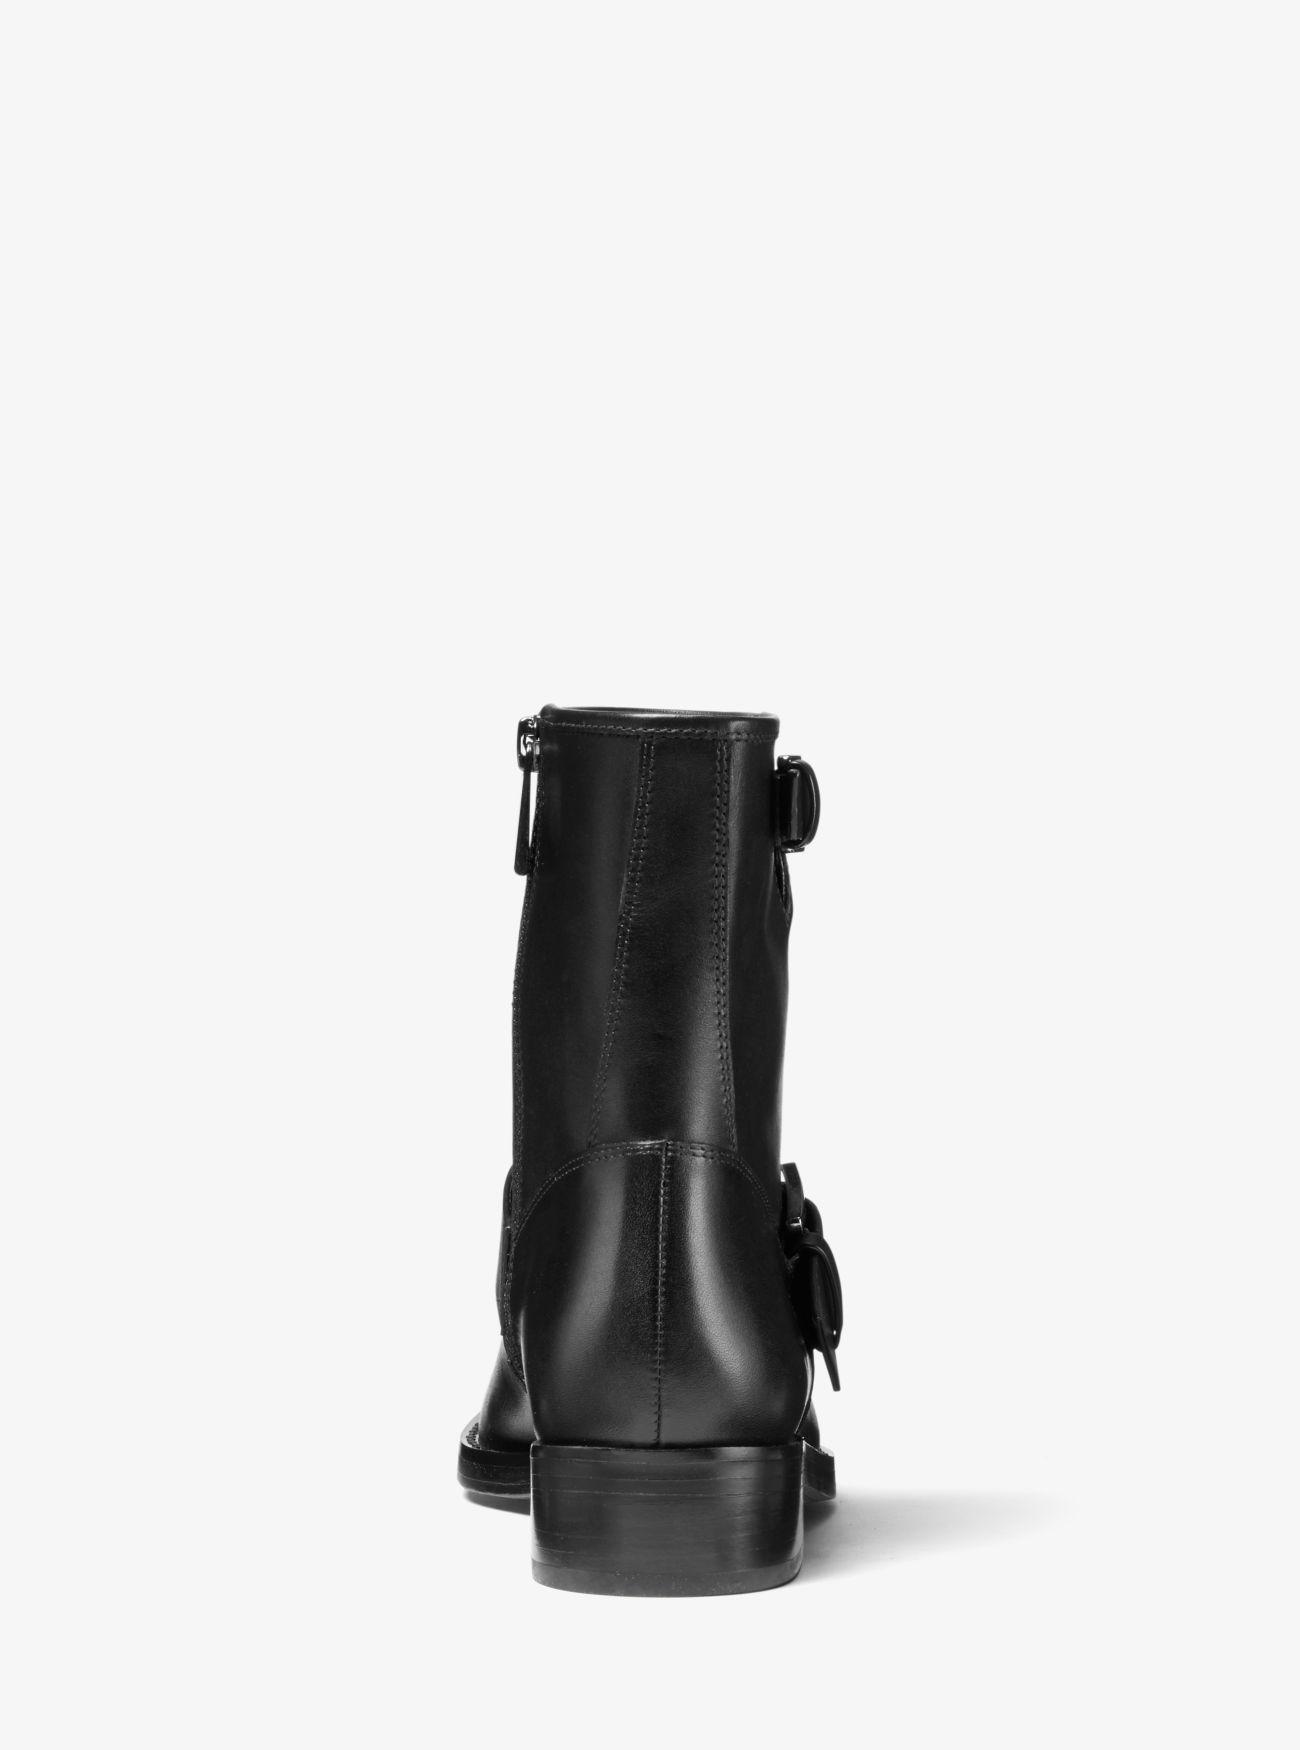 Michael Kors Reeves Leather Moto Boot in Black - Lyst